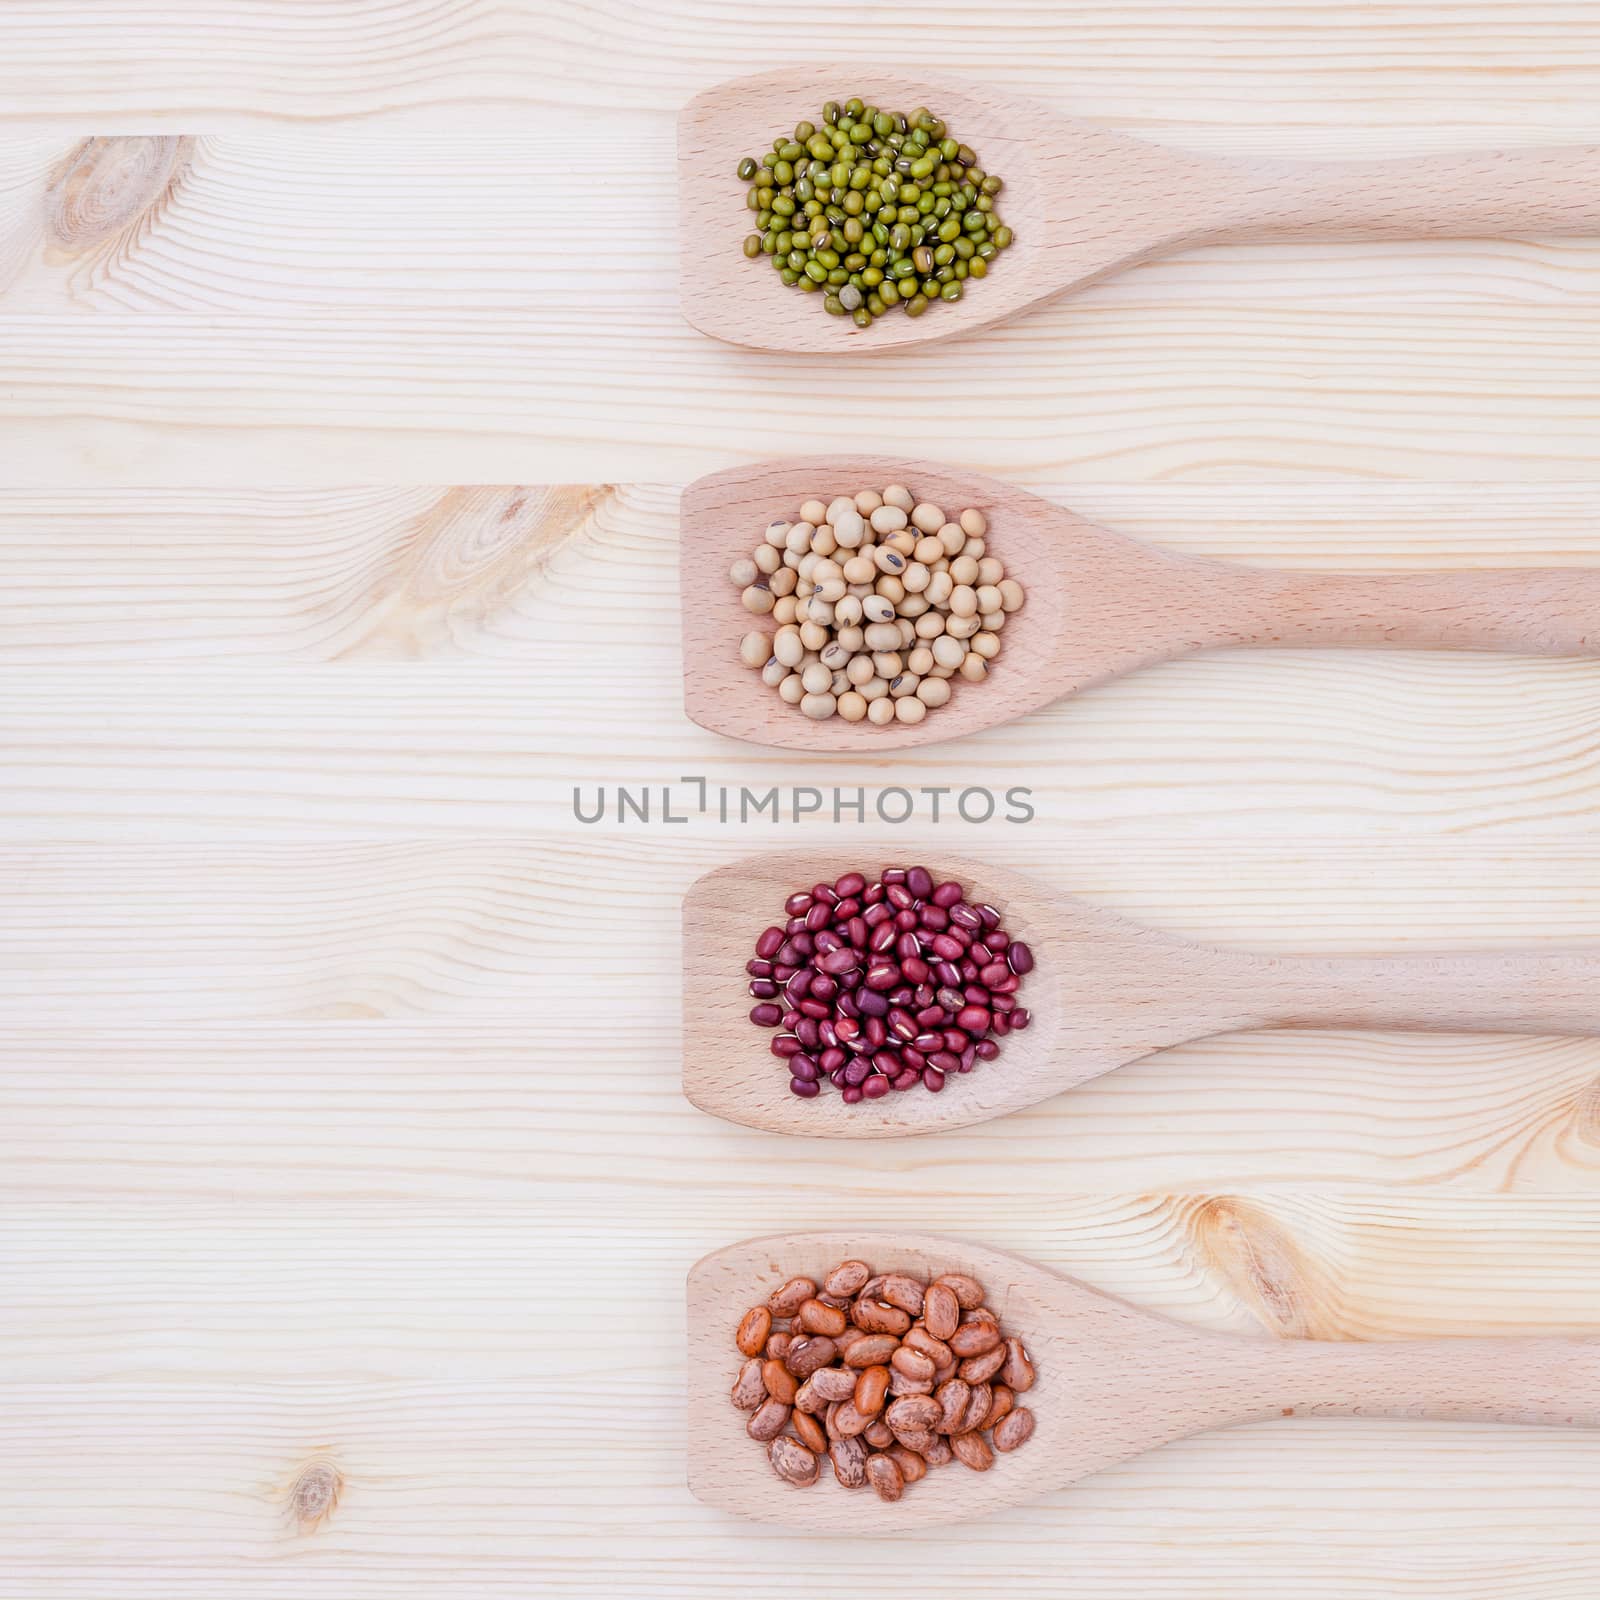 Assortment of beans and lentils in wooden spoon on wooden backgr by kerdkanno